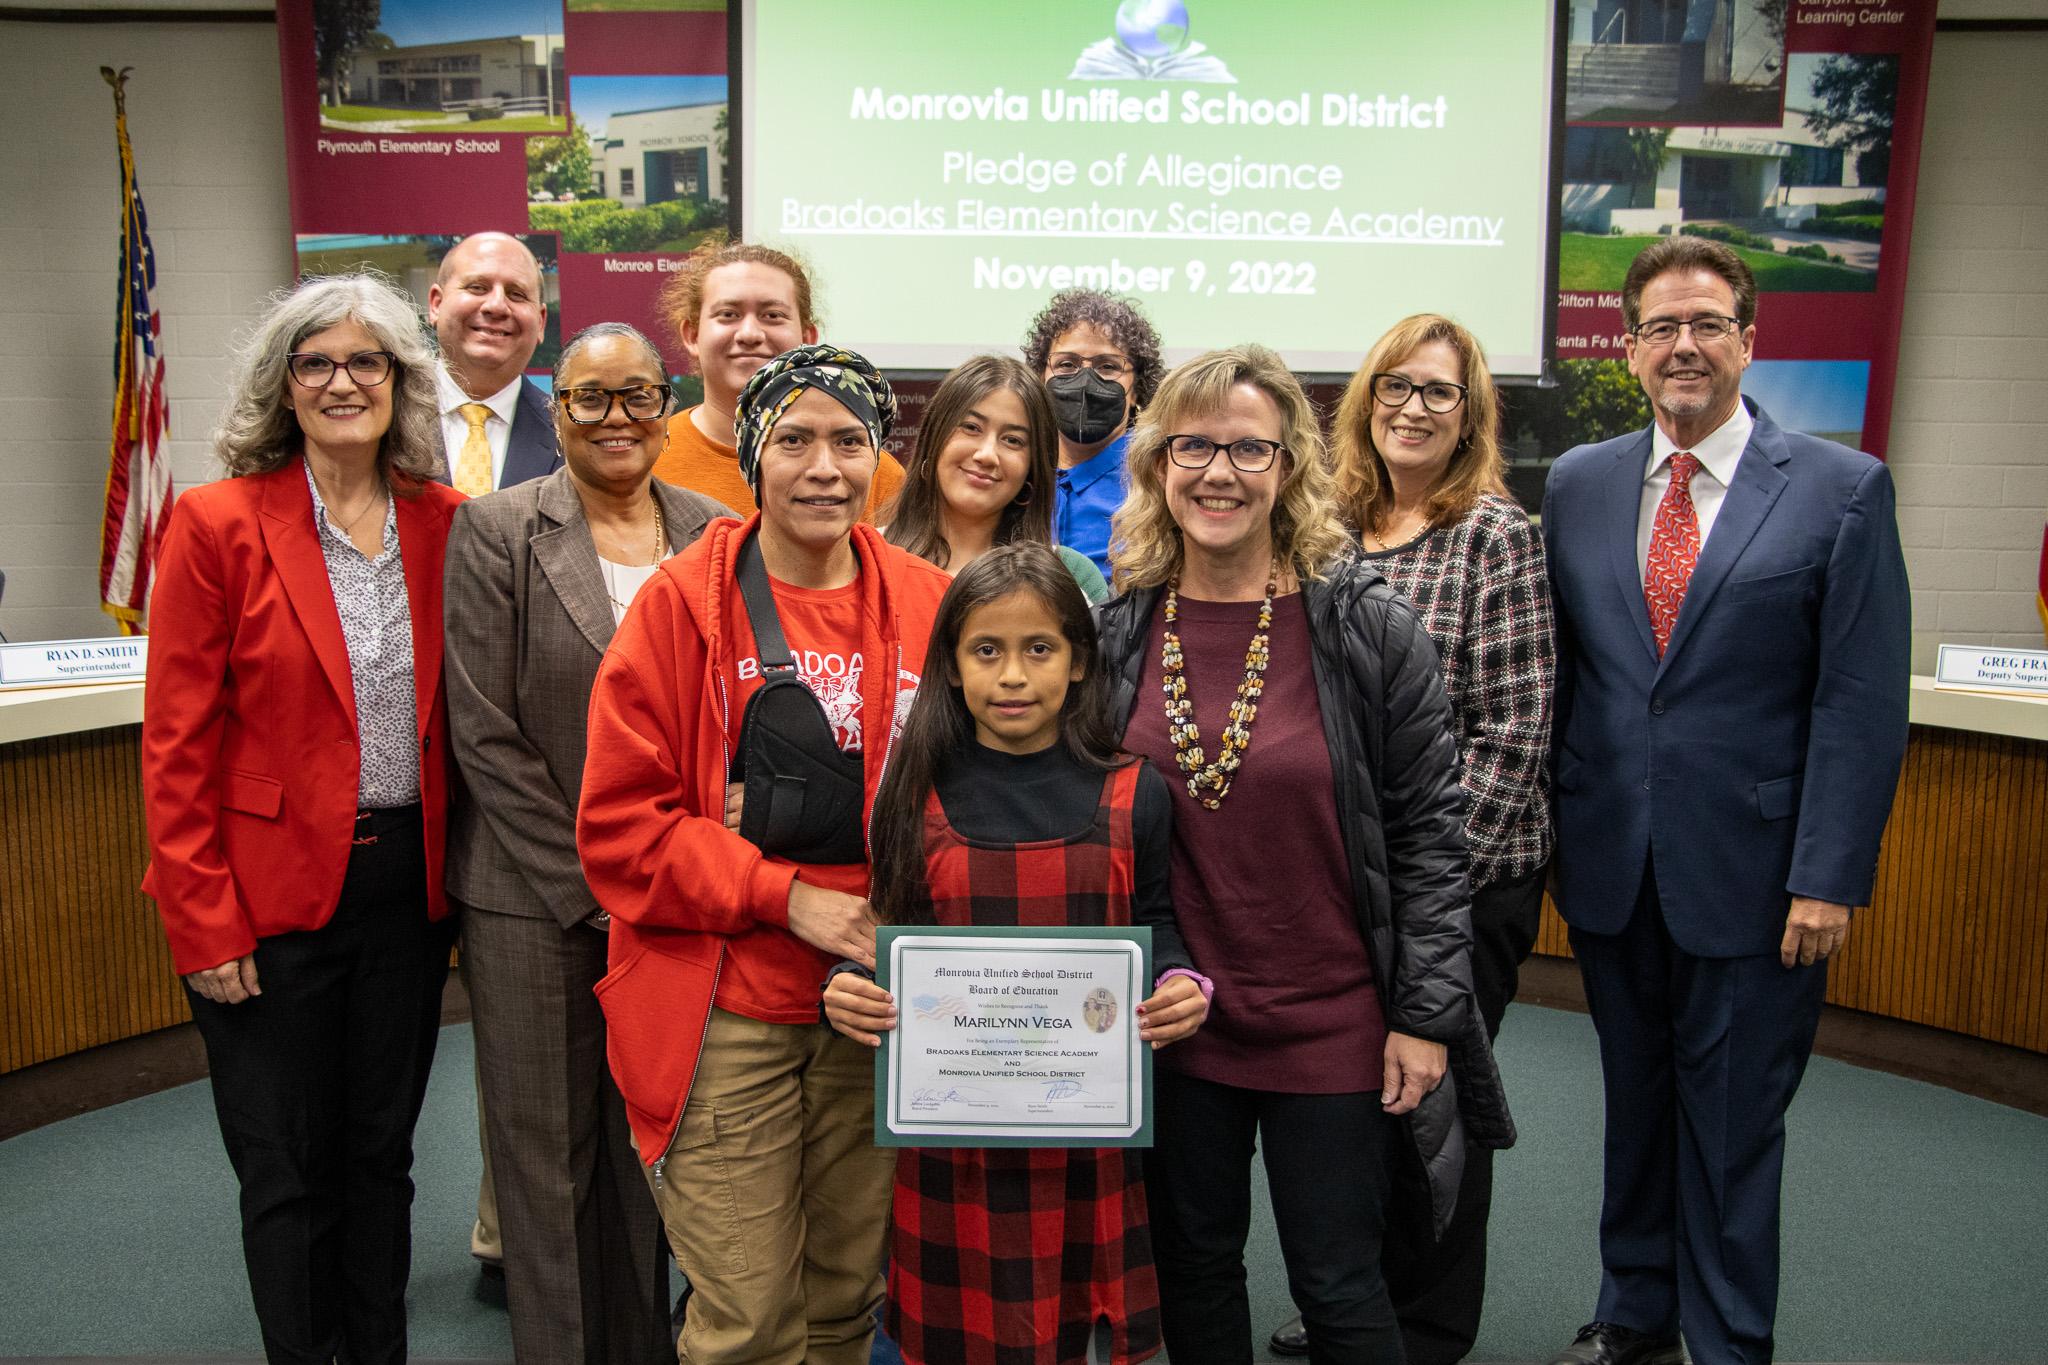 The Monrovia Unified Board of Education invited students from Bradoaks Elementary to lead the Pledge of Allegiance at its November meeting.